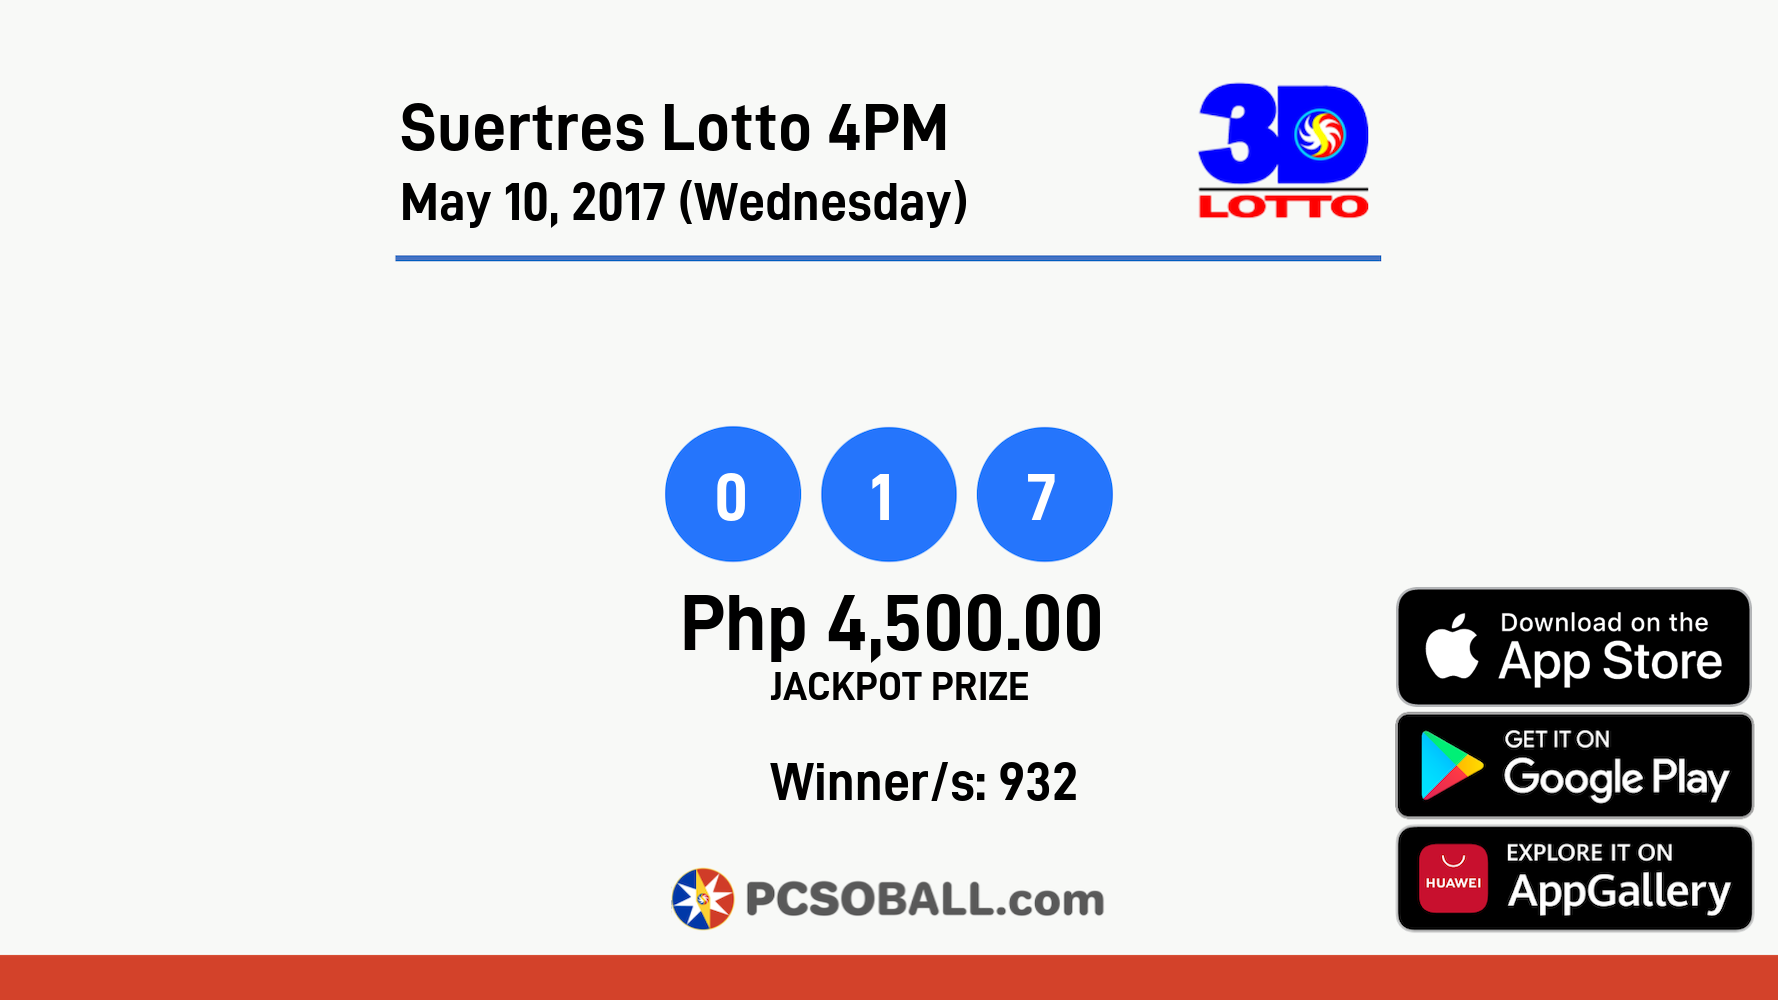 Suertres Lotto 4PM May 10, 2017 (Wednesday) Result